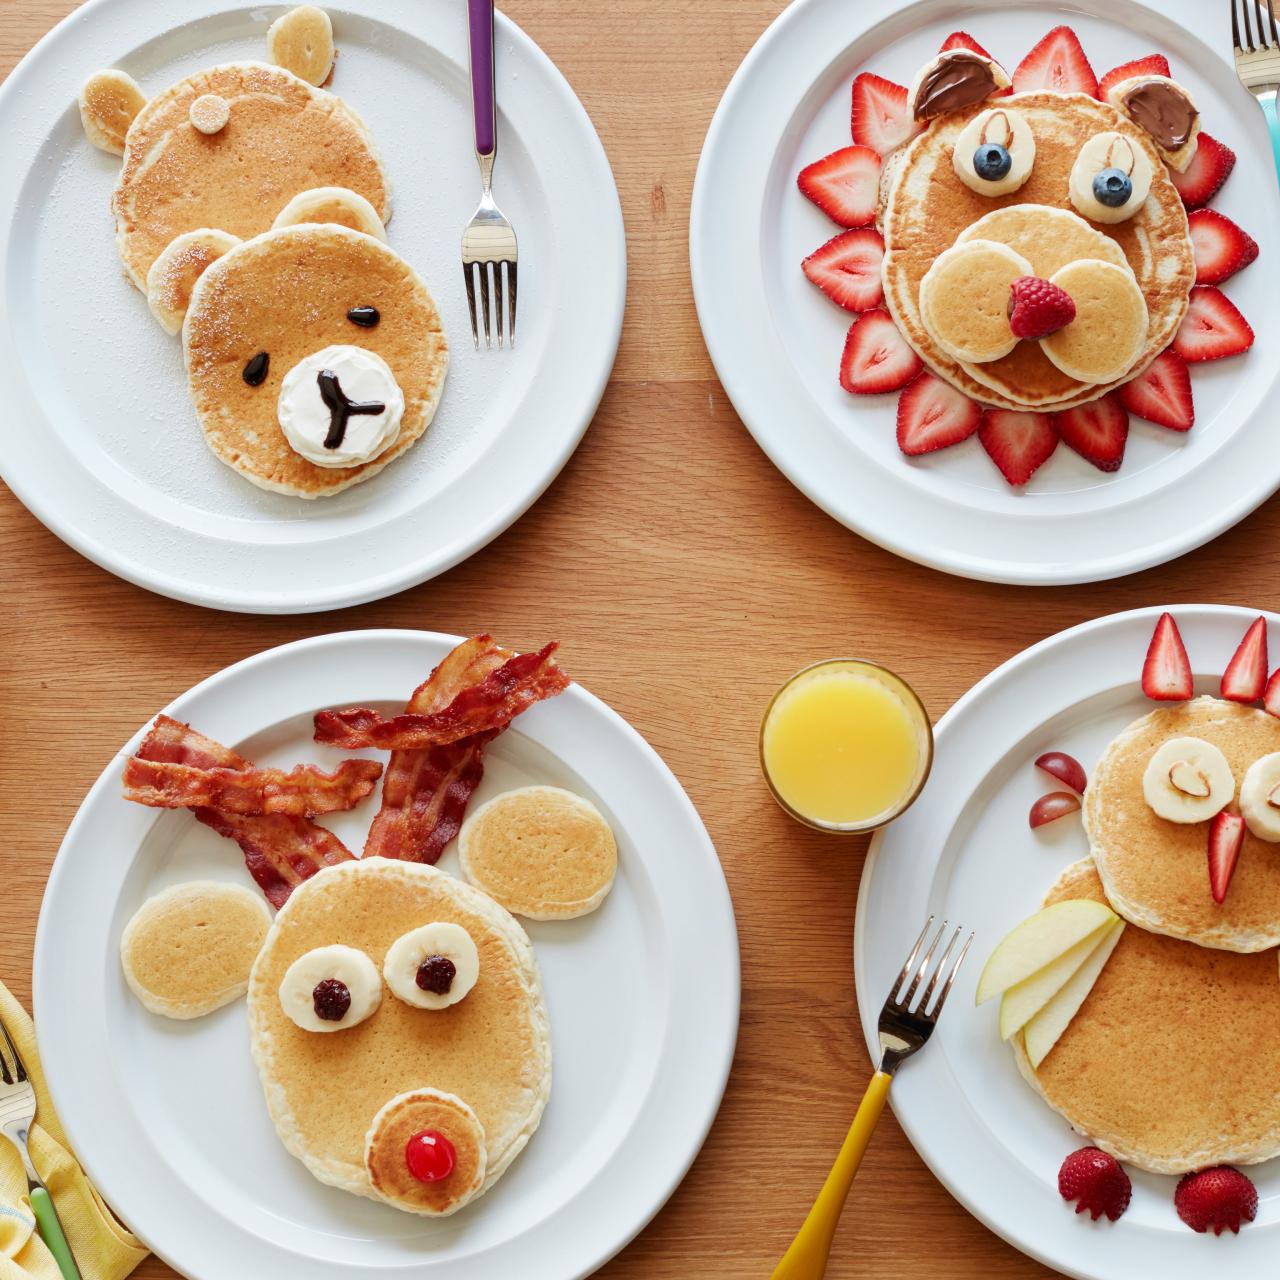 This Pancake Art Kit Lets You Make Adorable Pancakes Right On Your